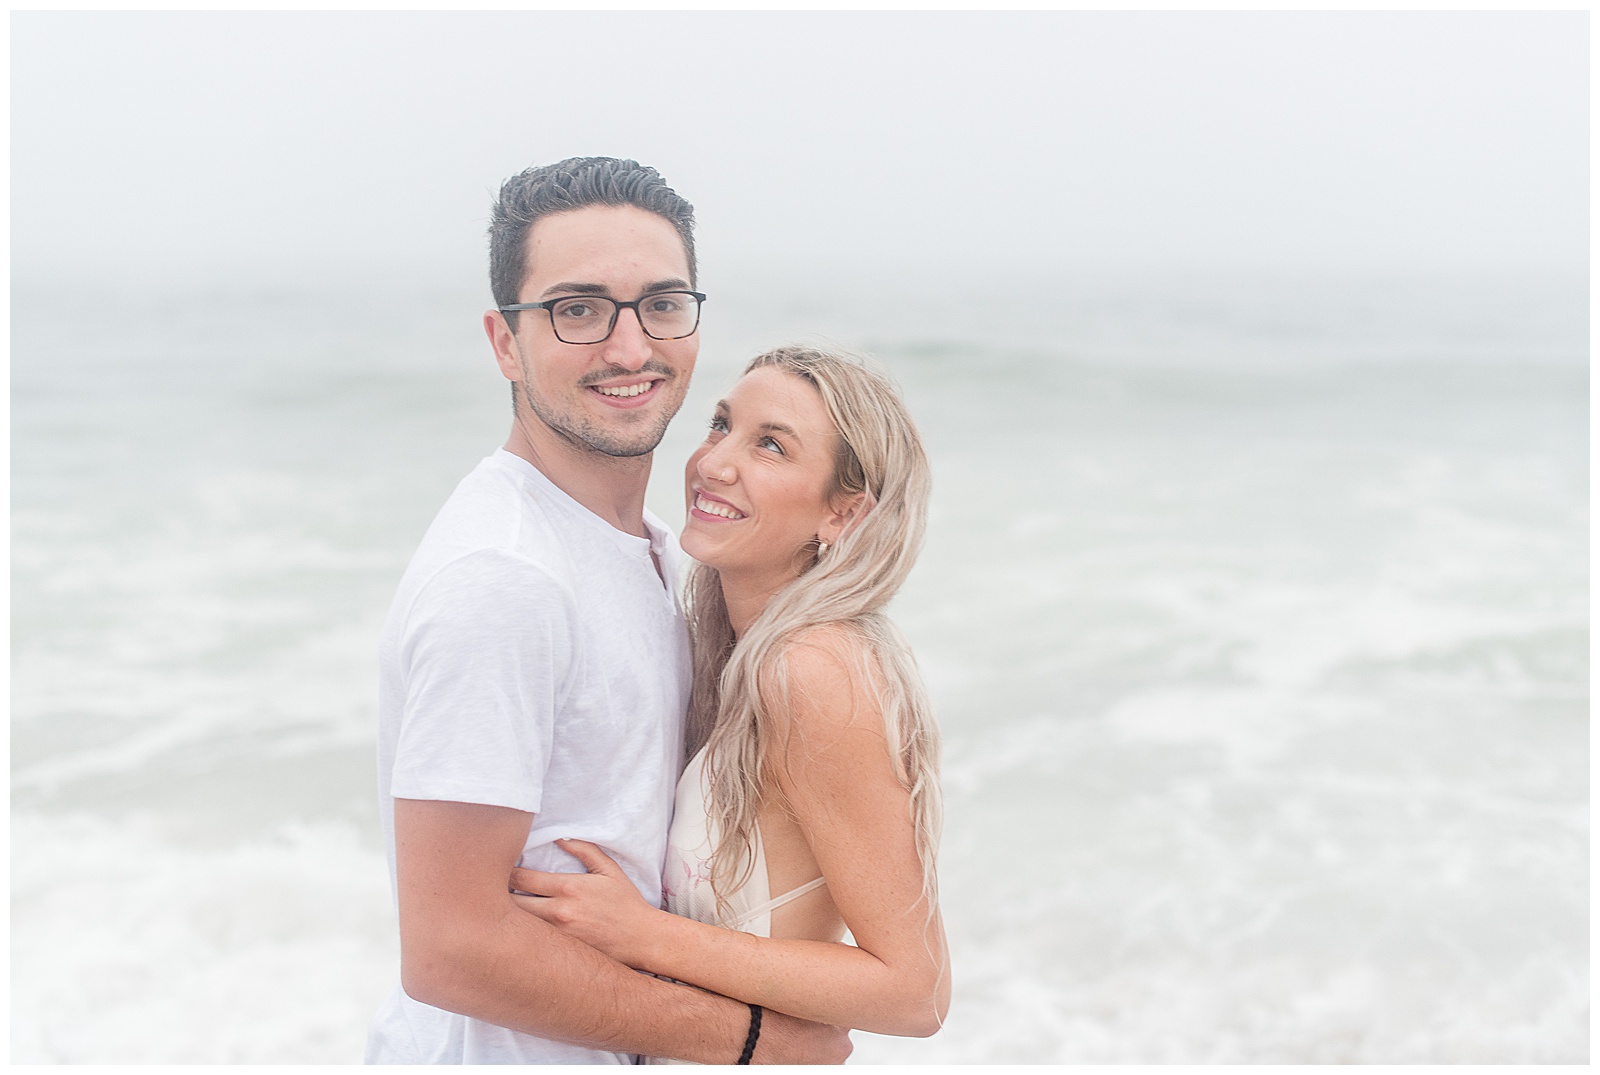 girl smiling looking up at guy as he smiles and looks at the camera with ocean behind them in new jersey